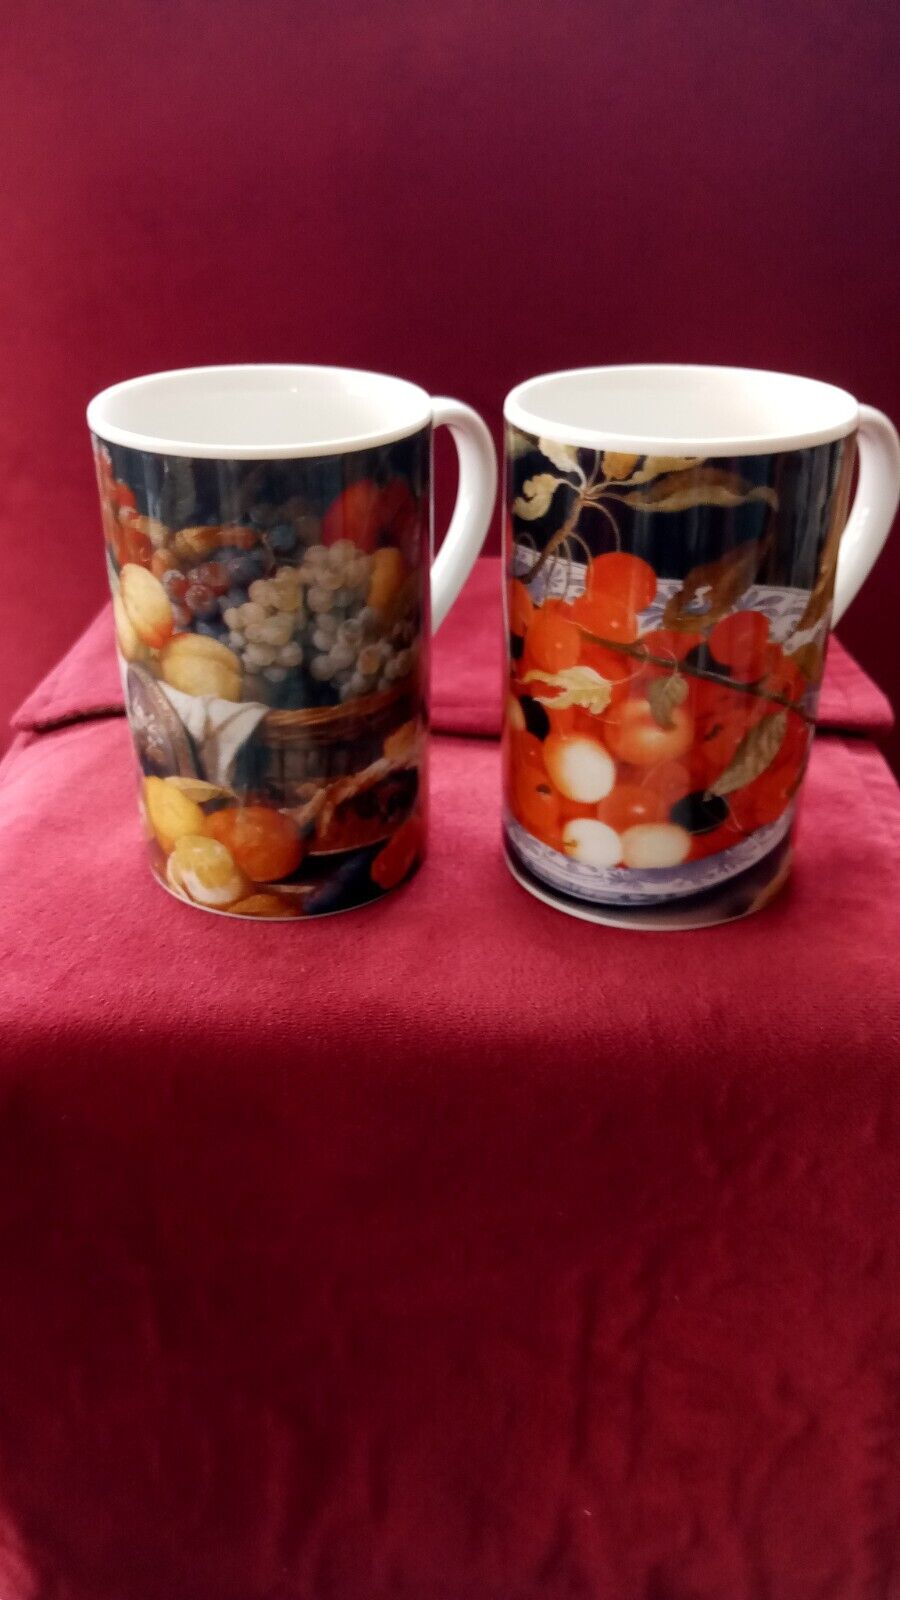 LOT of 2 DUNOON COFFEE MUGS--CHERRY & ONE GRAPE PATTERN - MADE IN SCOTLAND